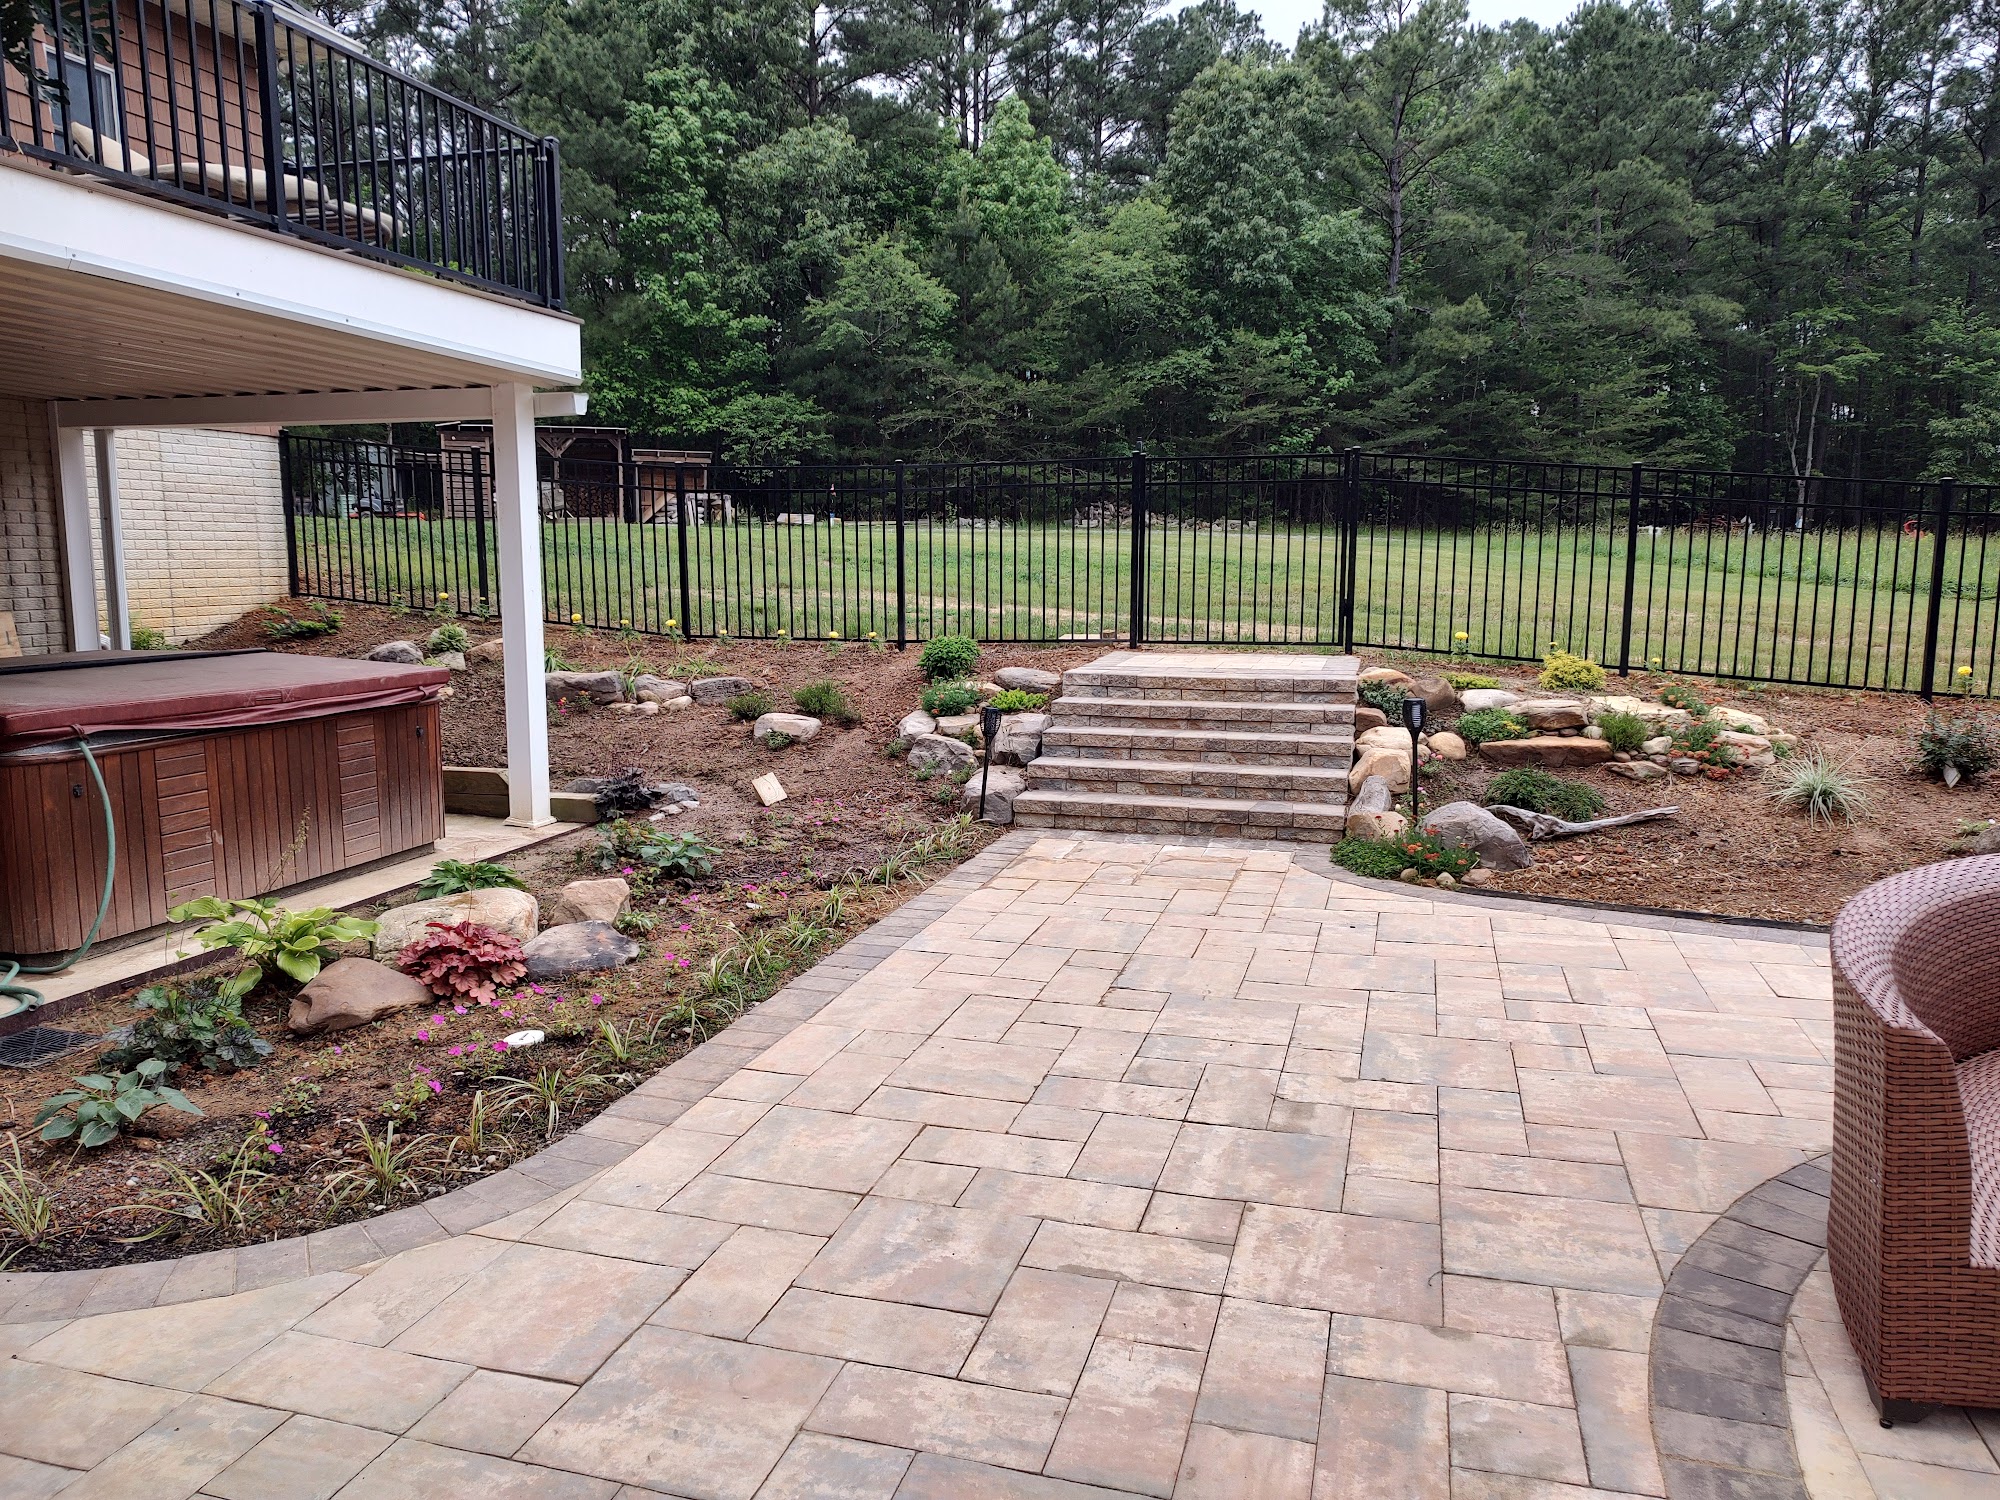 Coronado's Landscaping Hardscape Construction 20210 Point Lookout Rd, Great Mills Maryland 20634